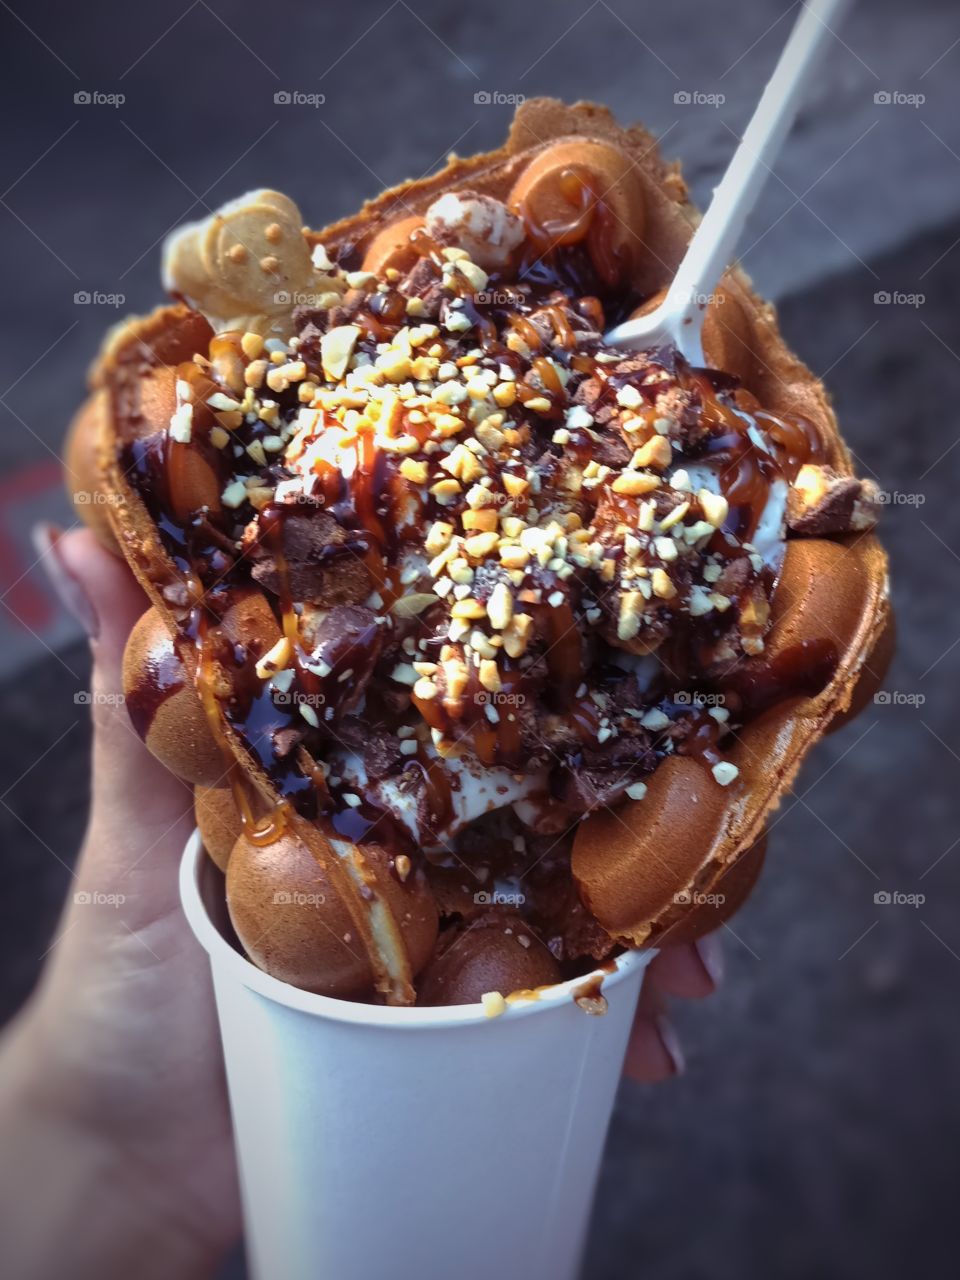 Ice cream with nuts and chocolate